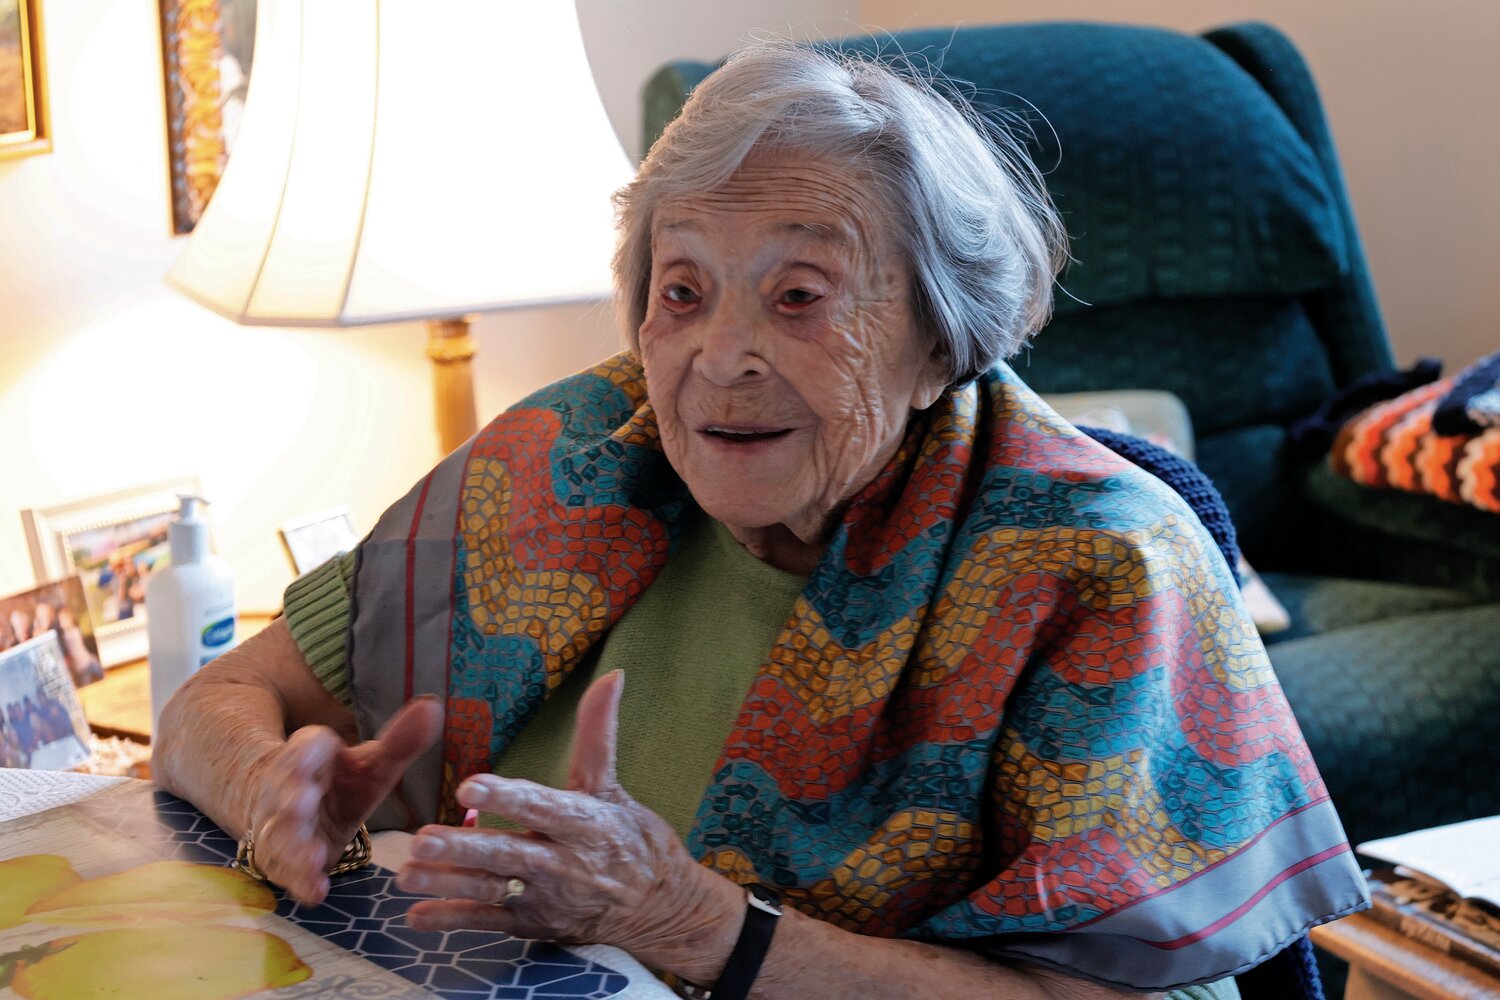 Helen Mermelstein-Weiss is a 101 year old Holocaust survivor residing in RiverSpring. She remains active and in high spirits regardless of her age.